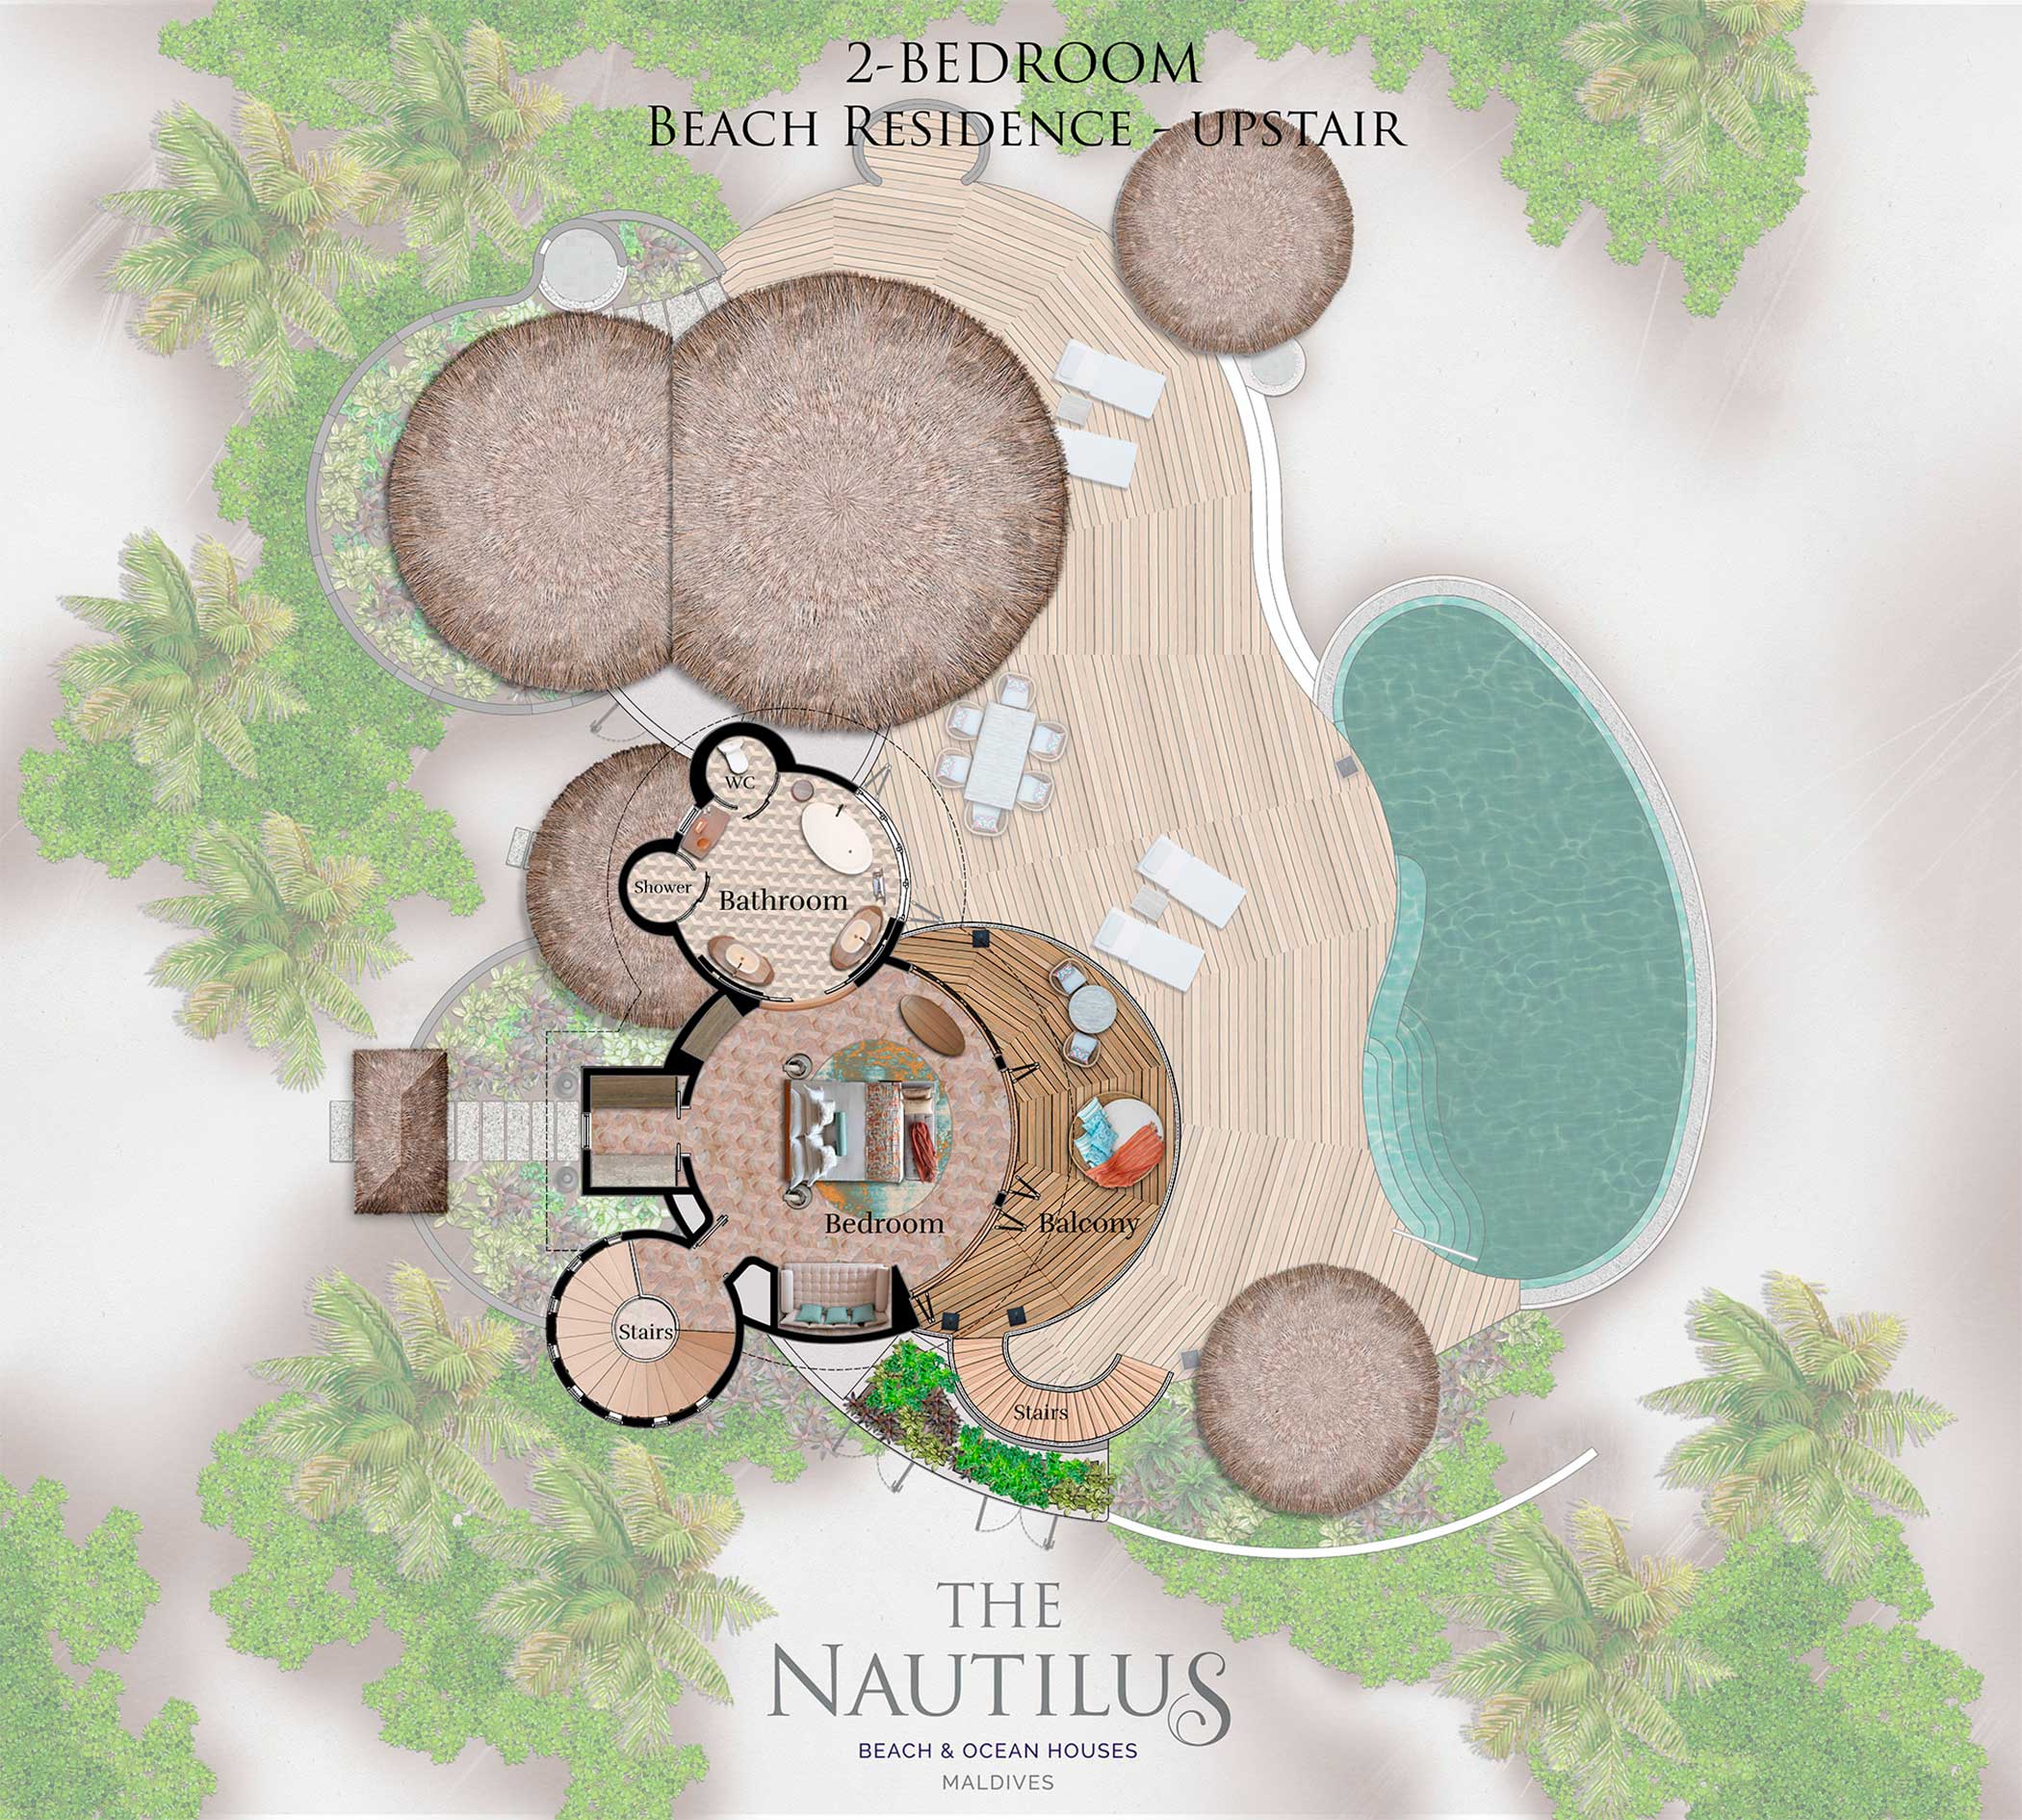 Beach residence 2-bedroom with private pool plan upstair